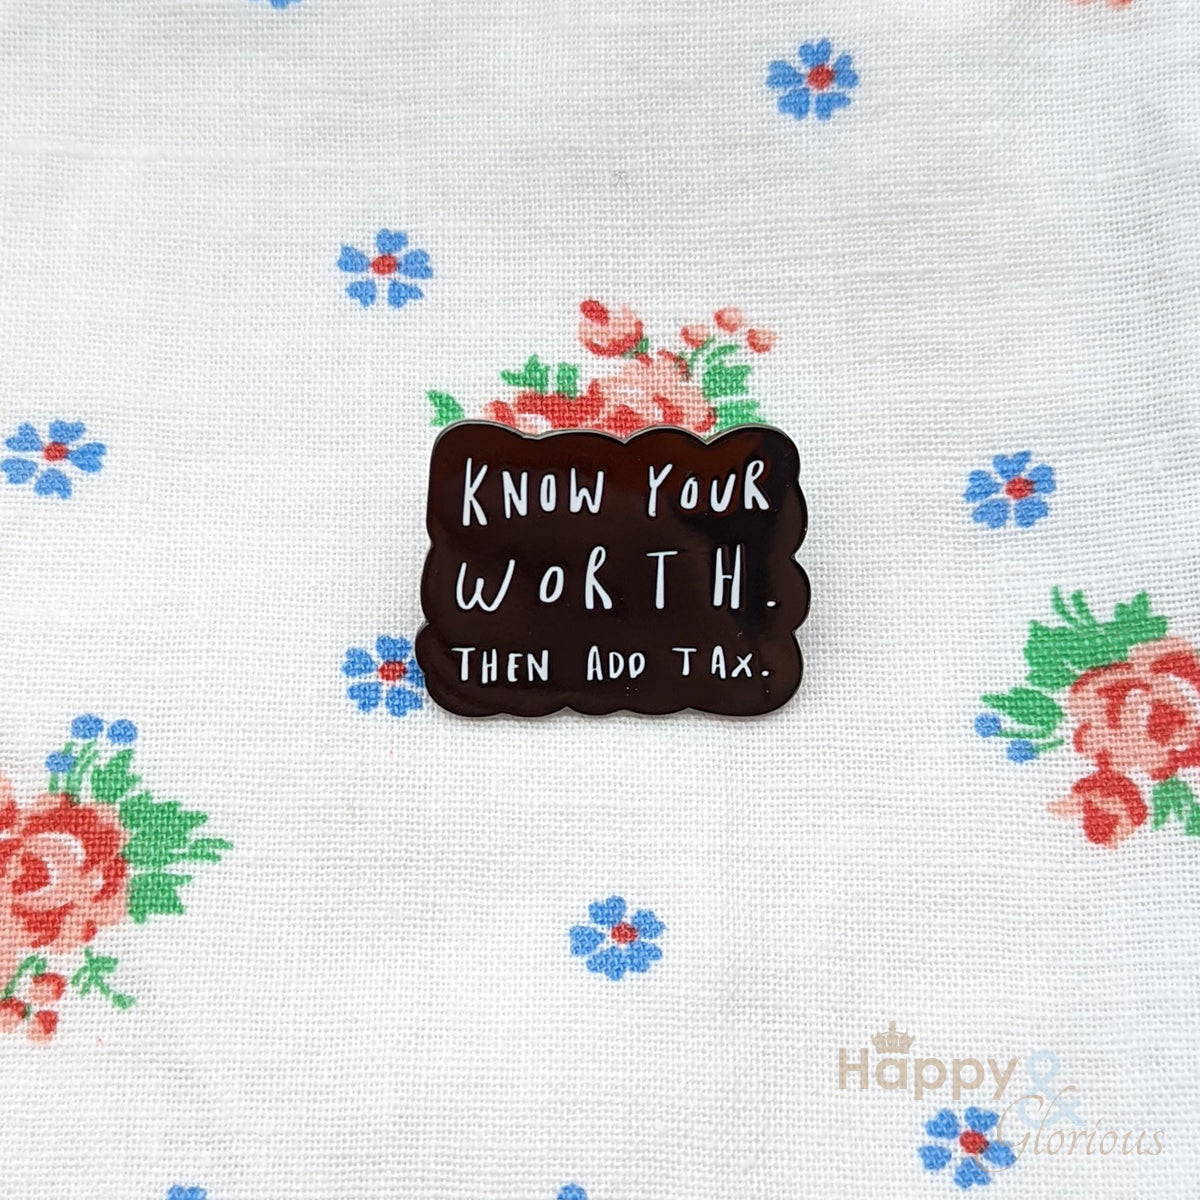 'Know your worth, then add tax' positive pin badge